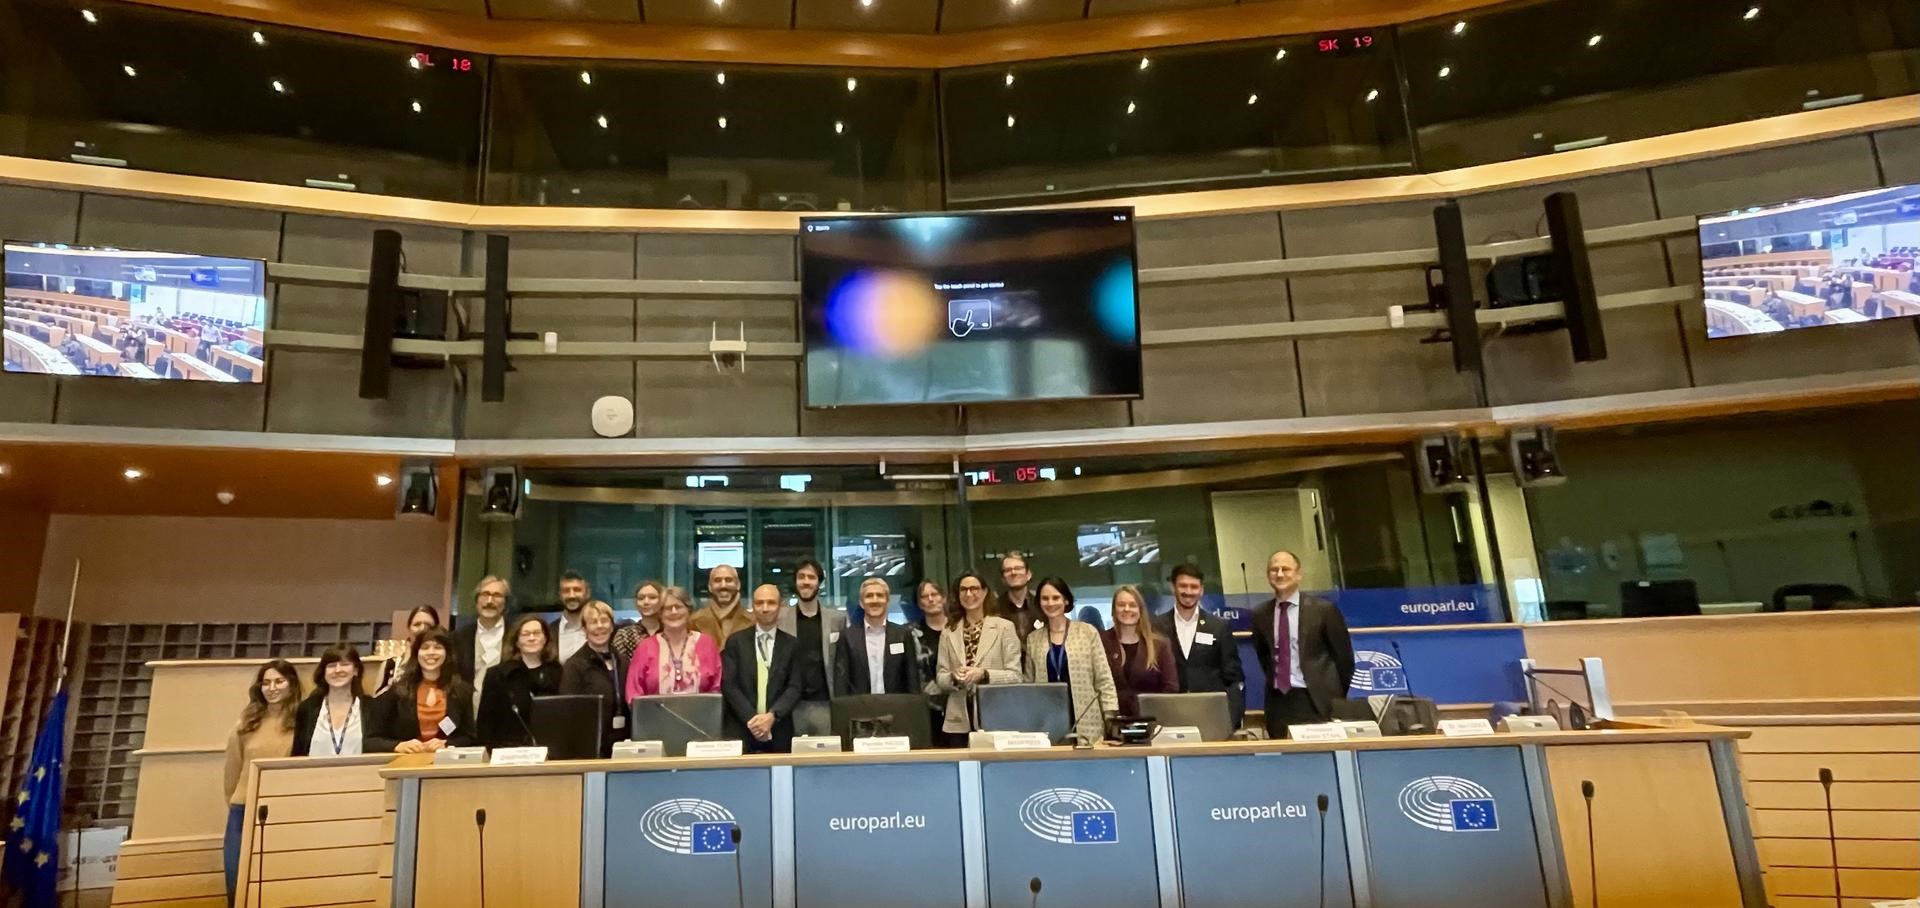 The EDORA partners at the EU Parliament together with MEP Pernille WEISS who chaired the event.